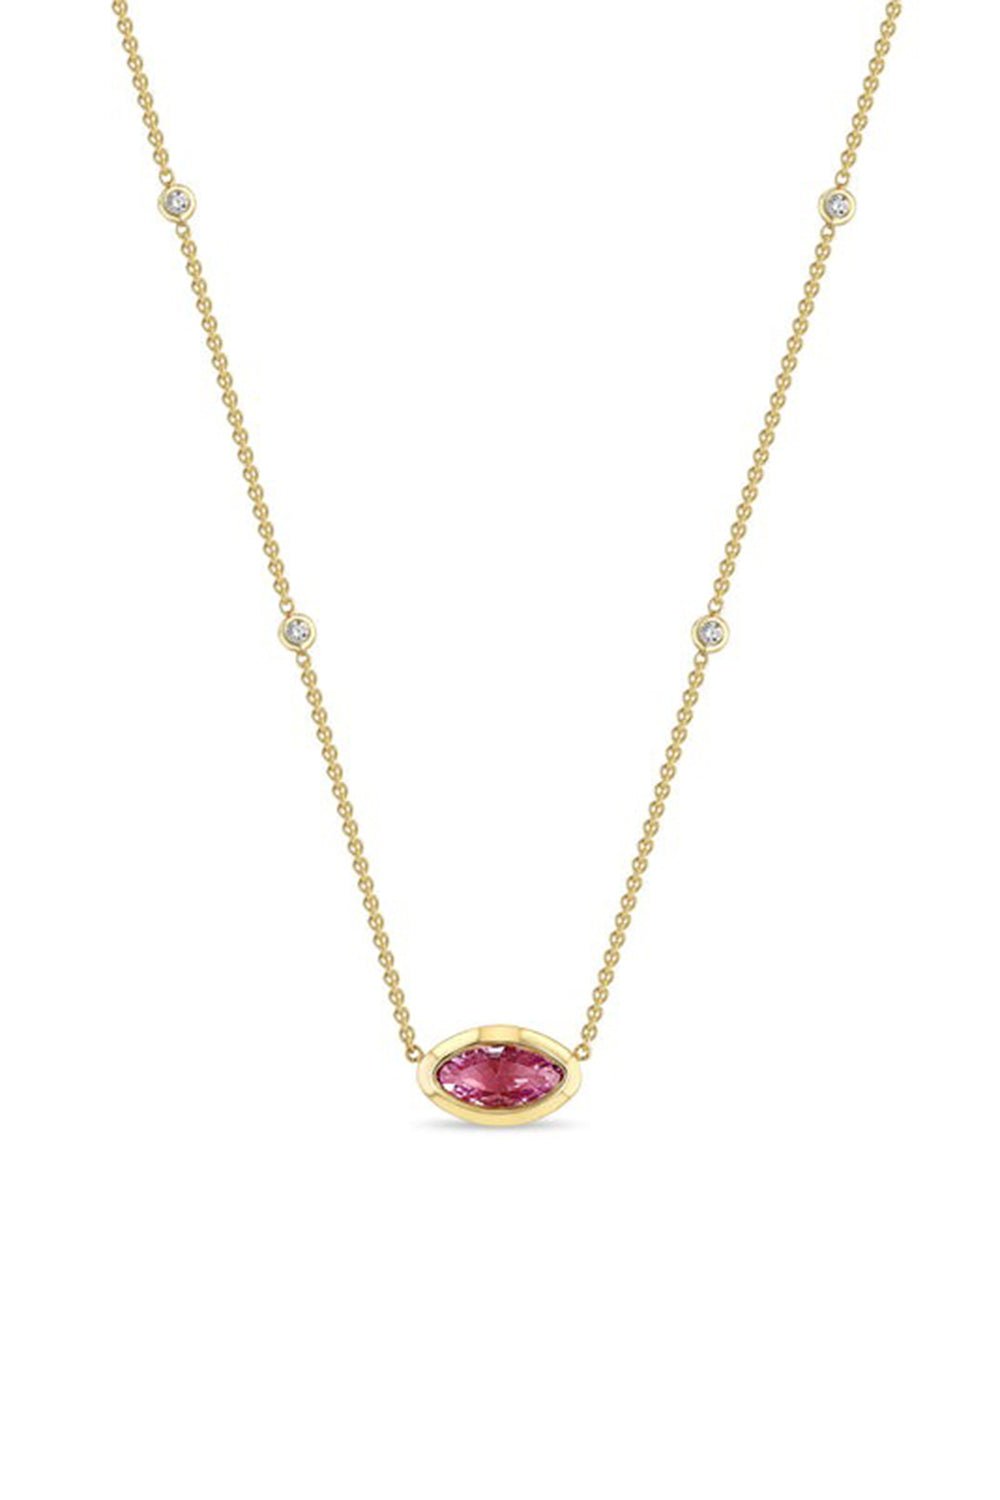 ZOE CHICCO-Floating Diamond Pink Sapphire Necklace-YELLOW GOLD